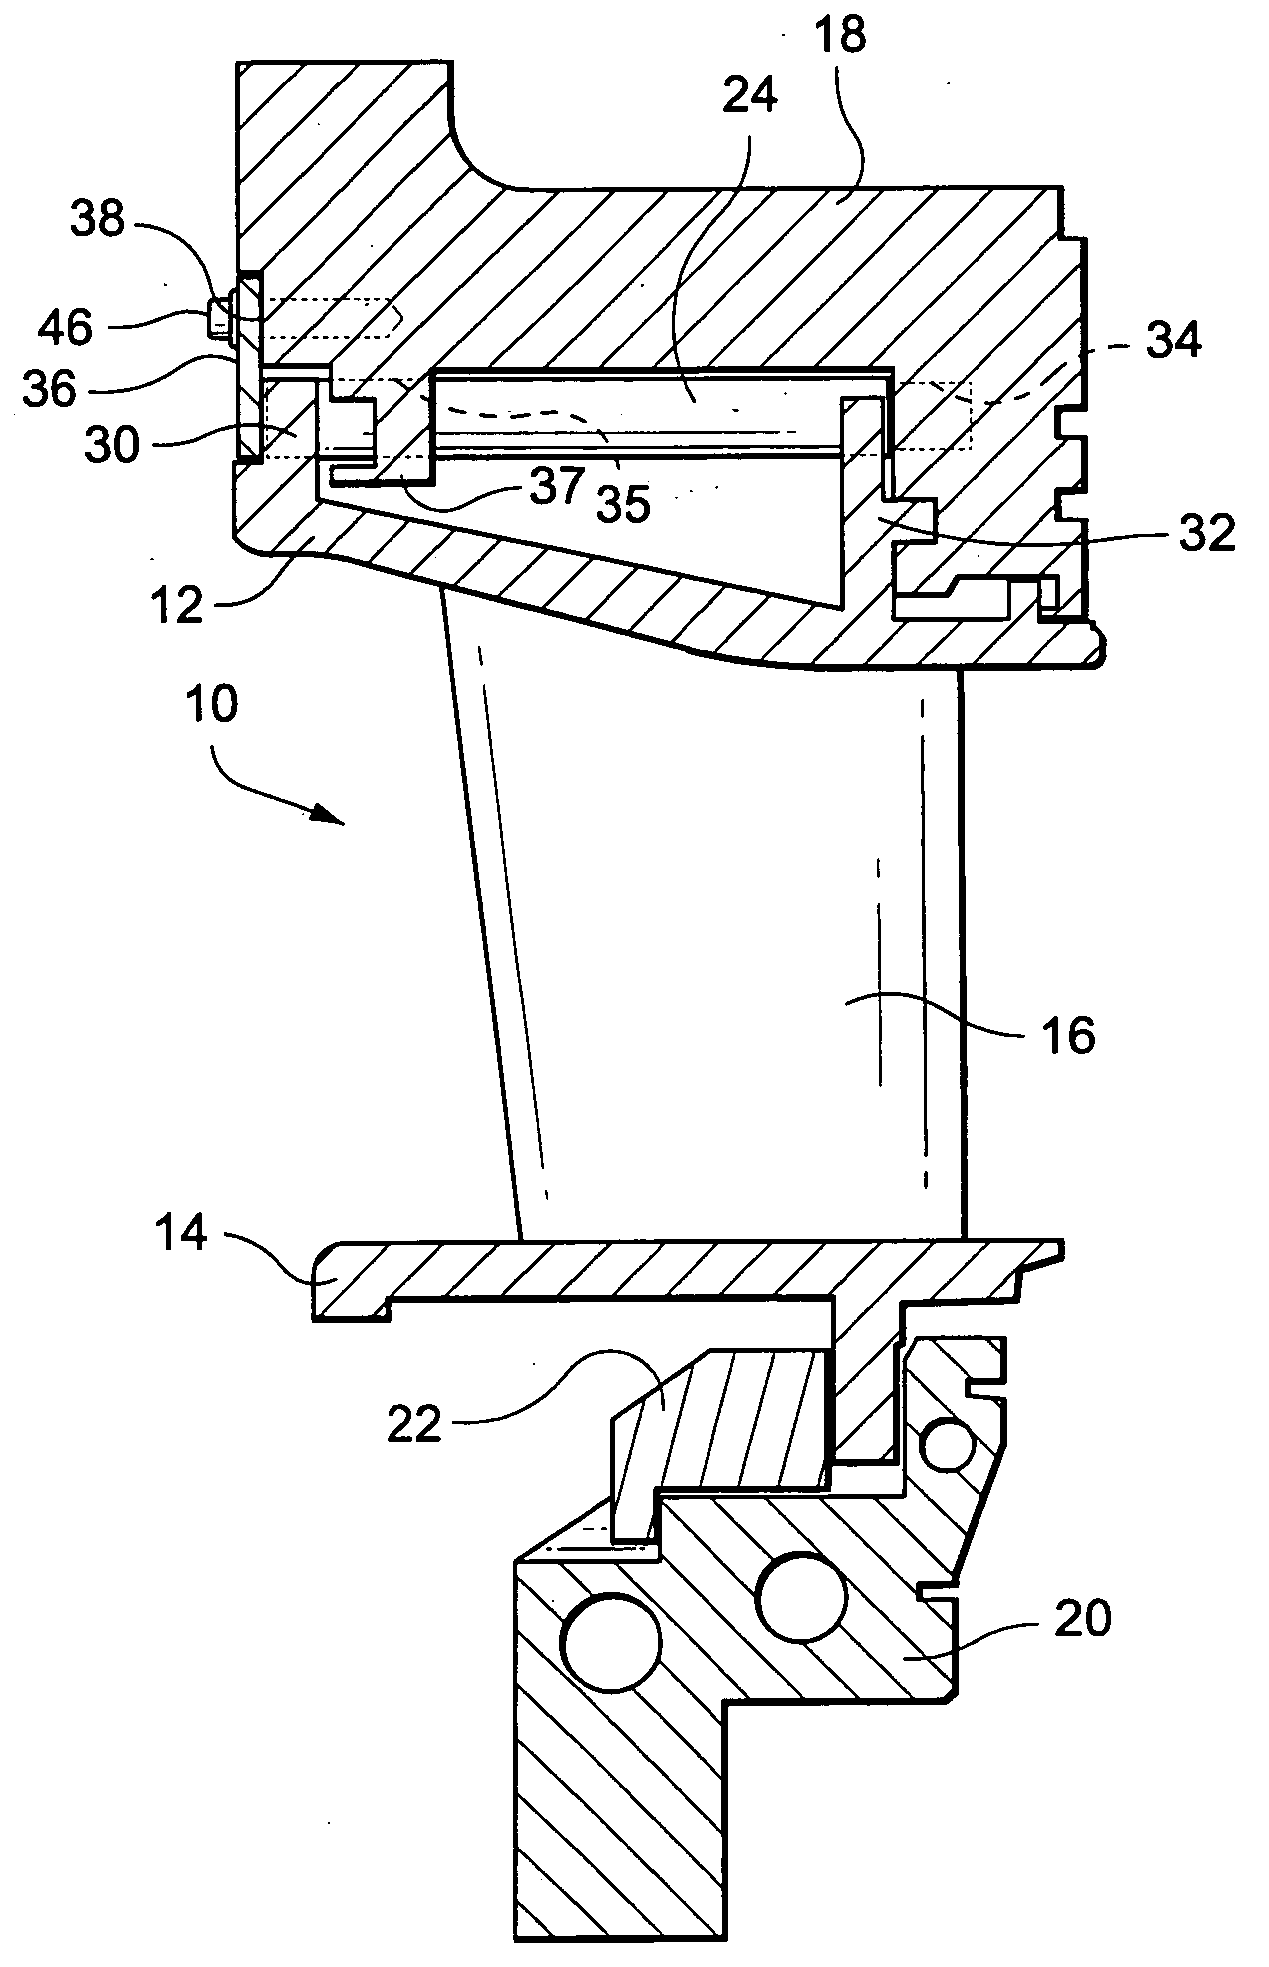 Apparatus and methods for removing and installing a selected nozzle segment of a gas turbine in an axial direction